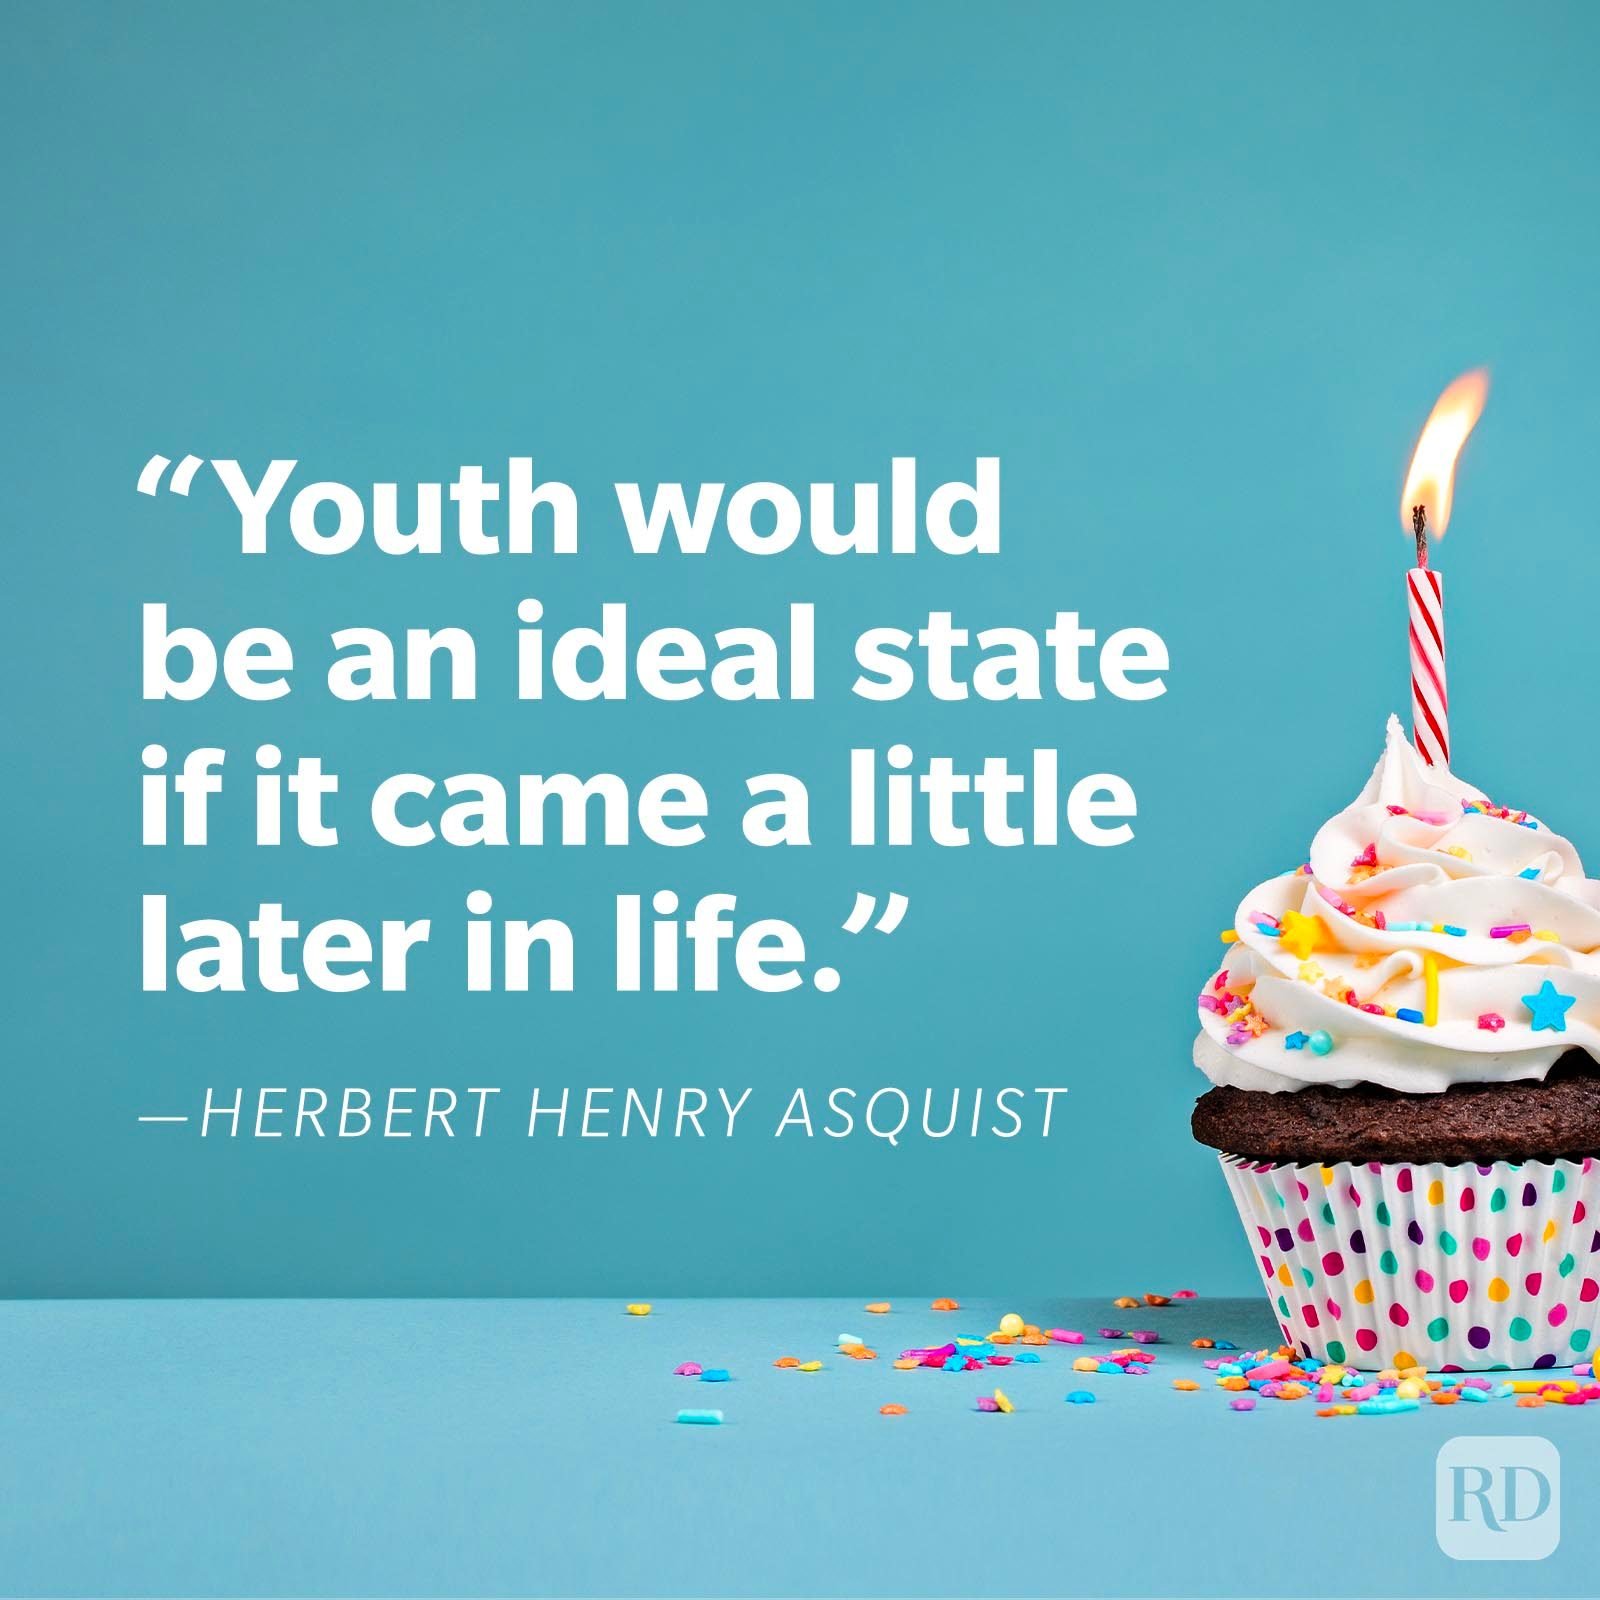 funny 13th birthday quotes